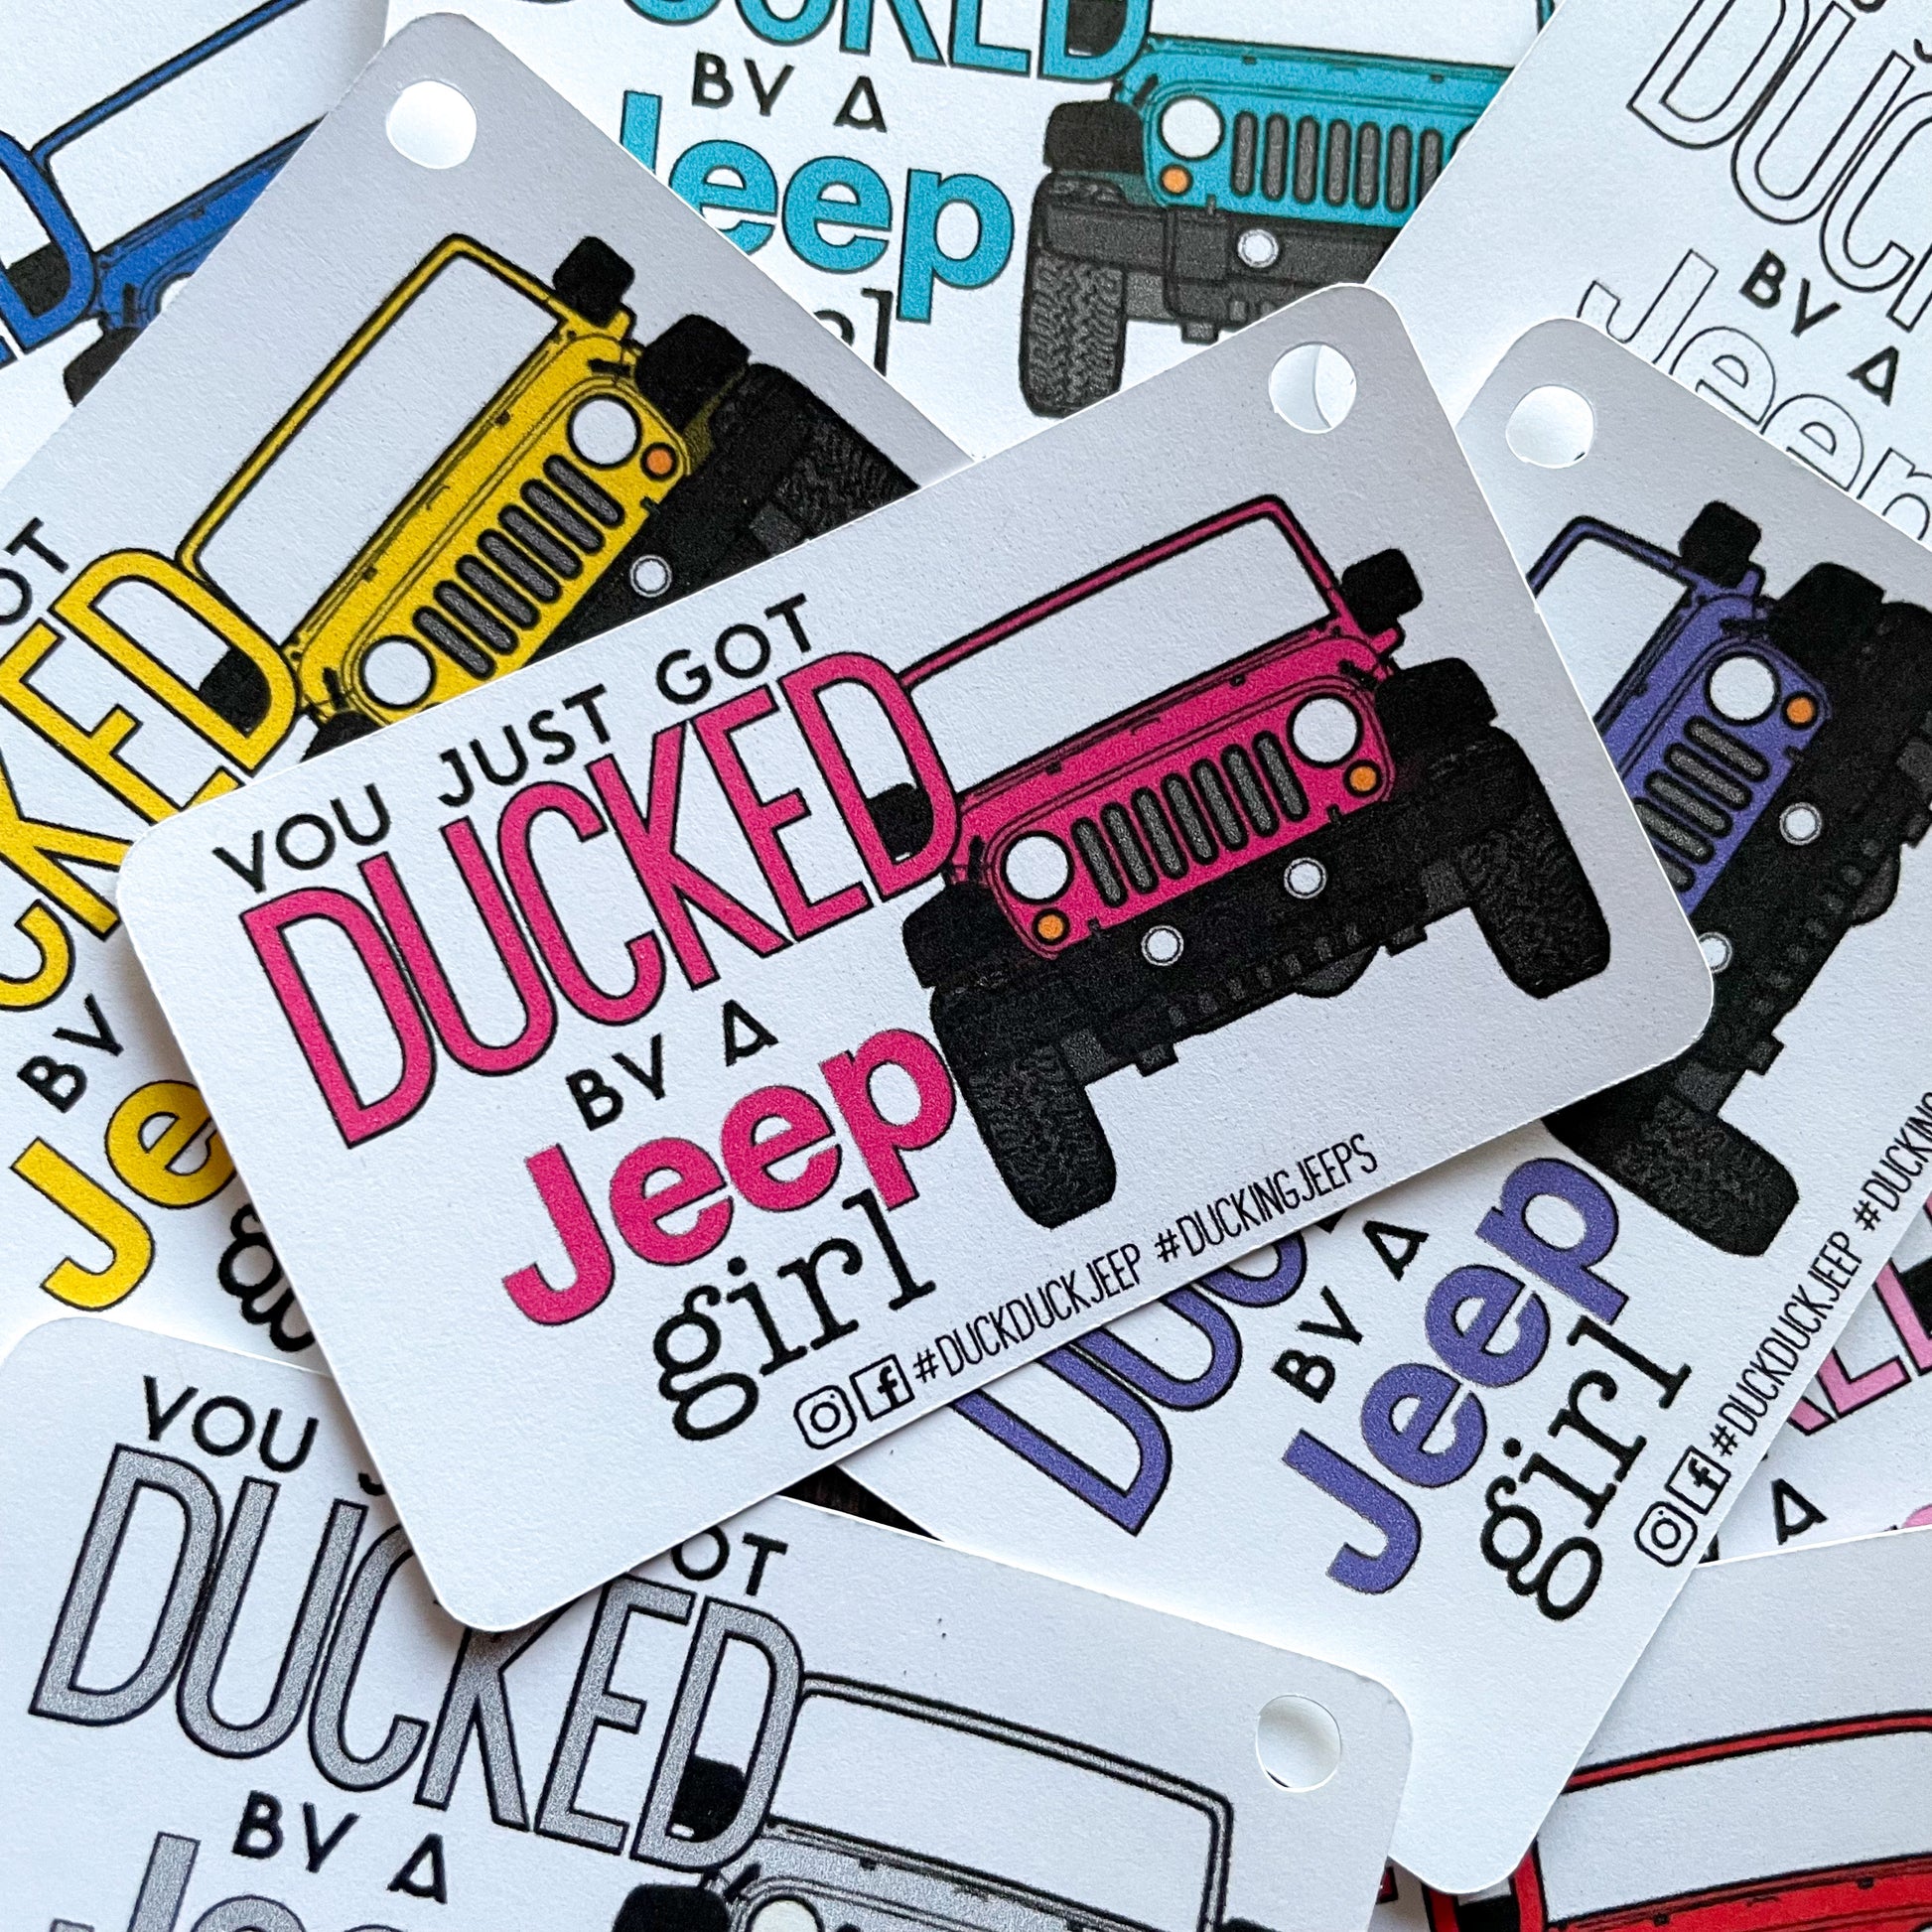 You just got Jeep Girl Duck Tagged by a Jeep Girl Duck Tag.